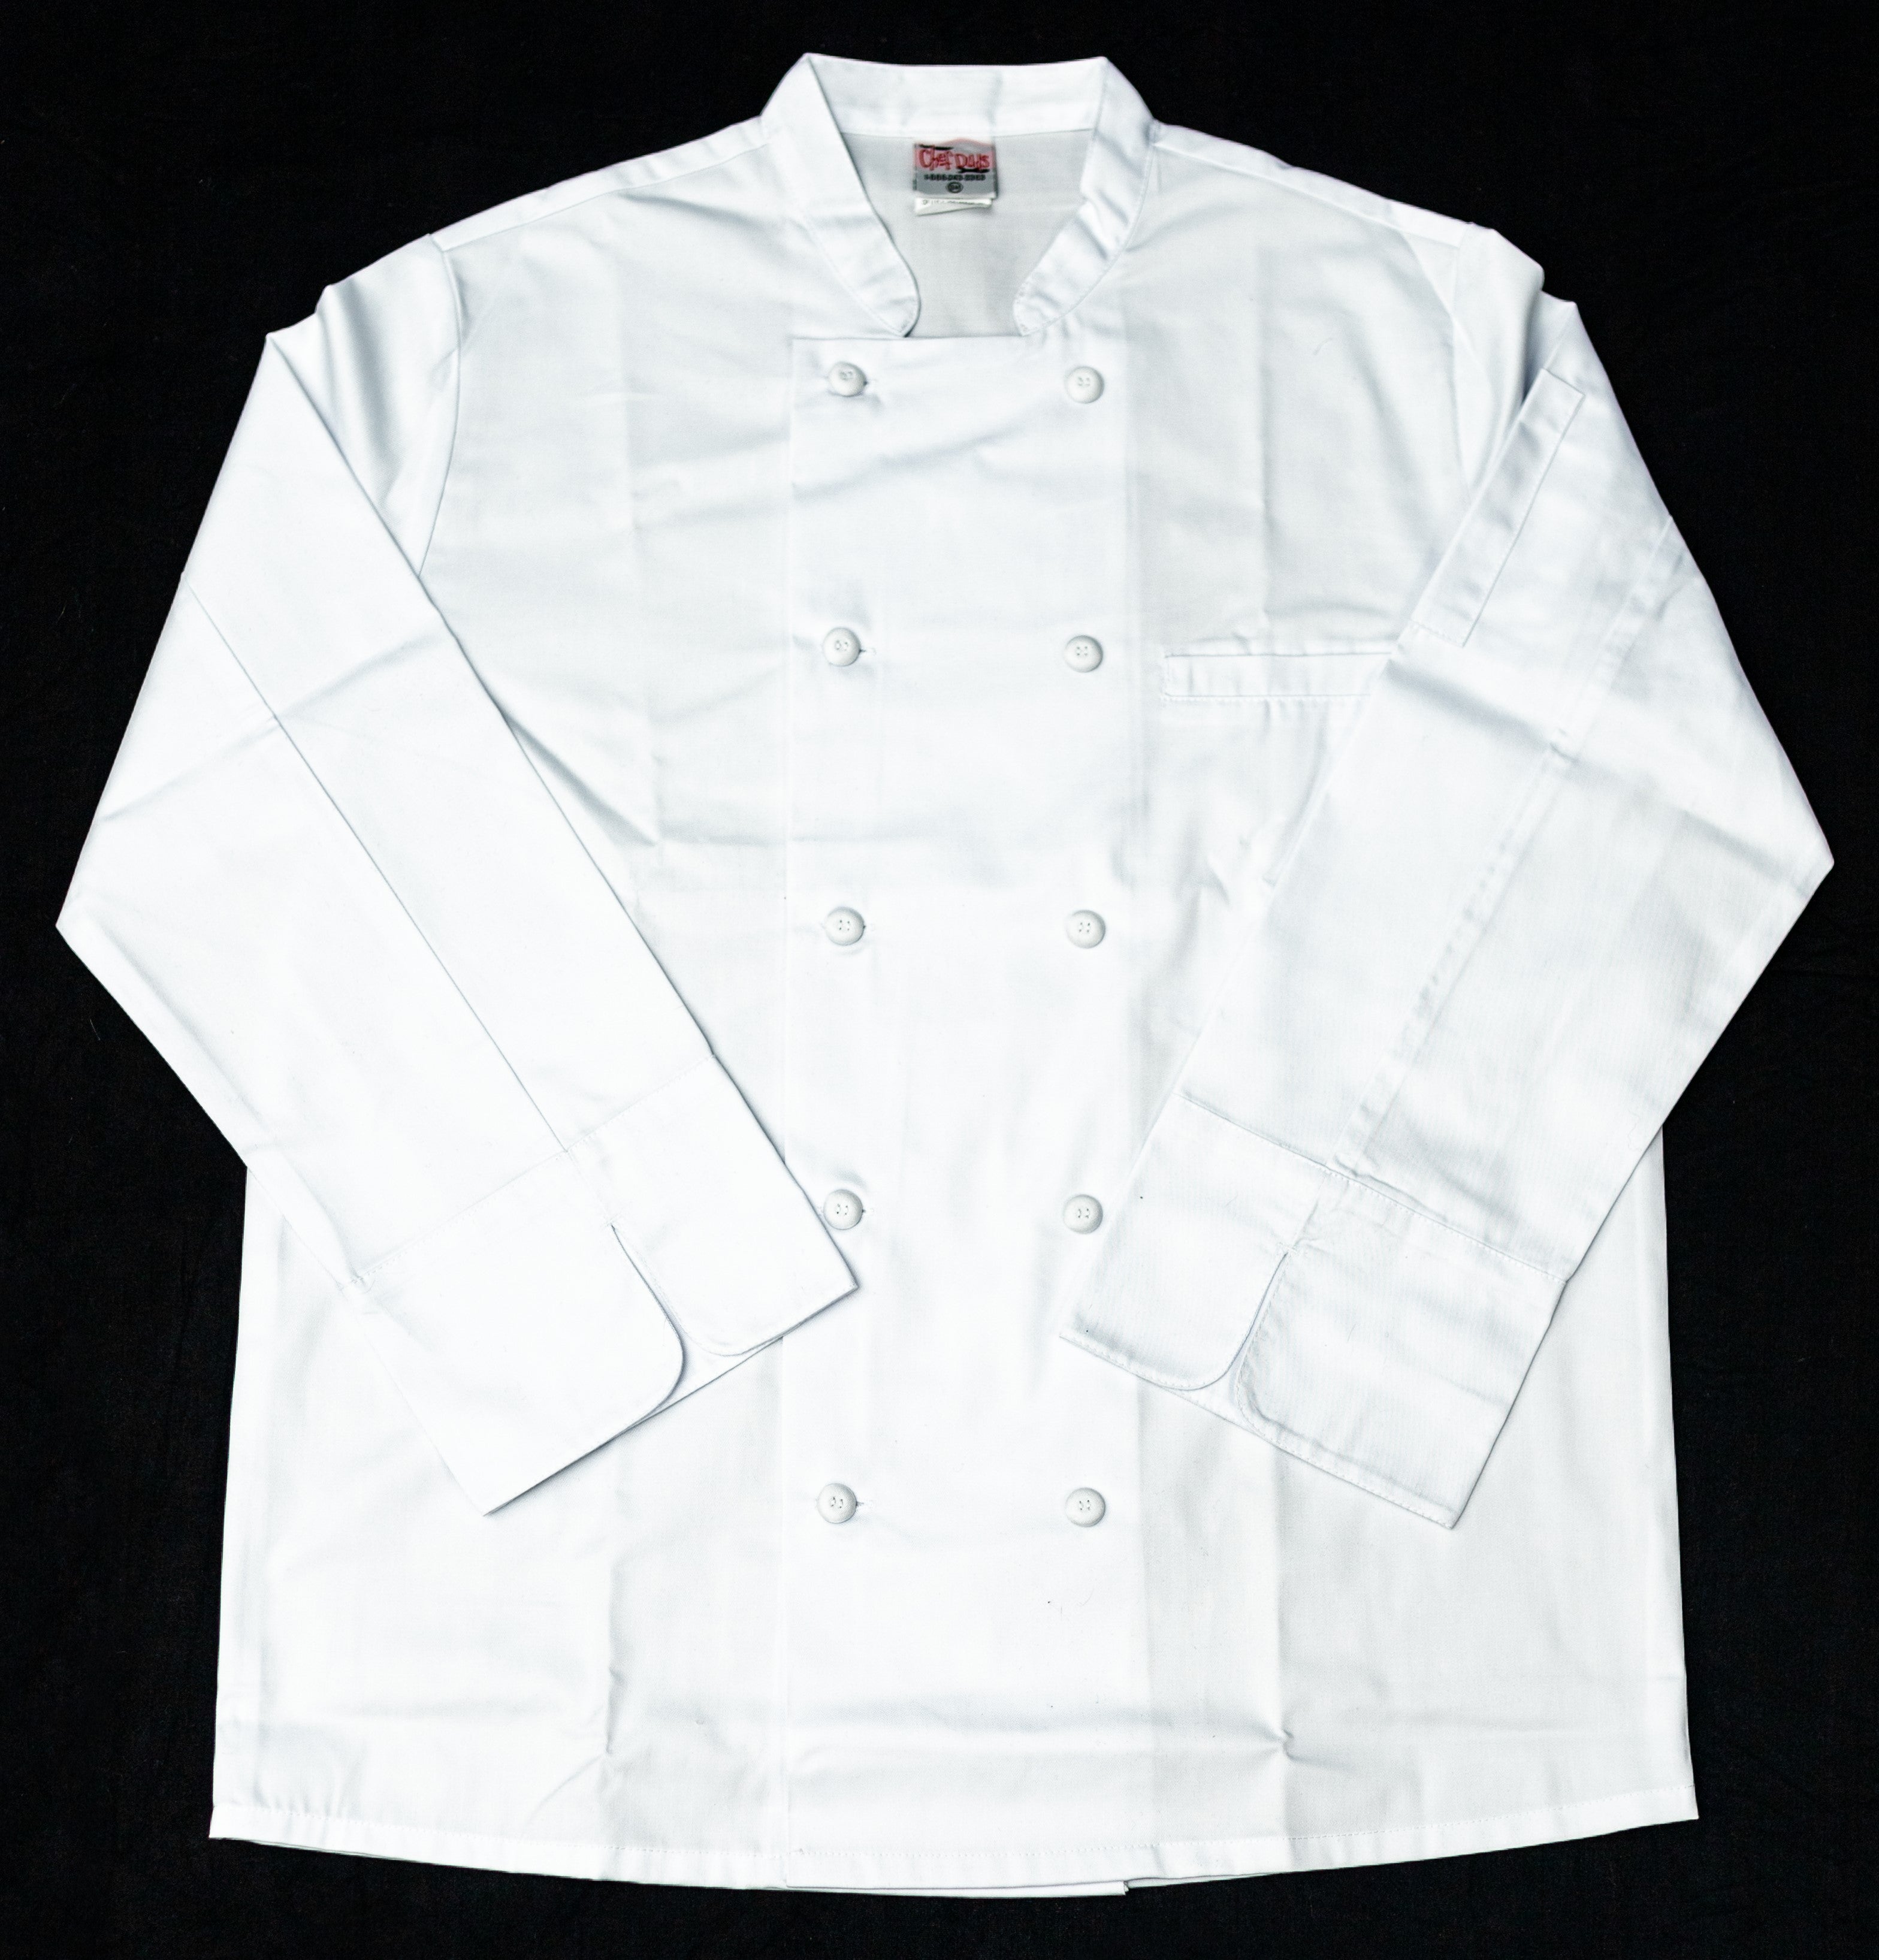 Executive Chef Coat with Cloth-Covered Buttons